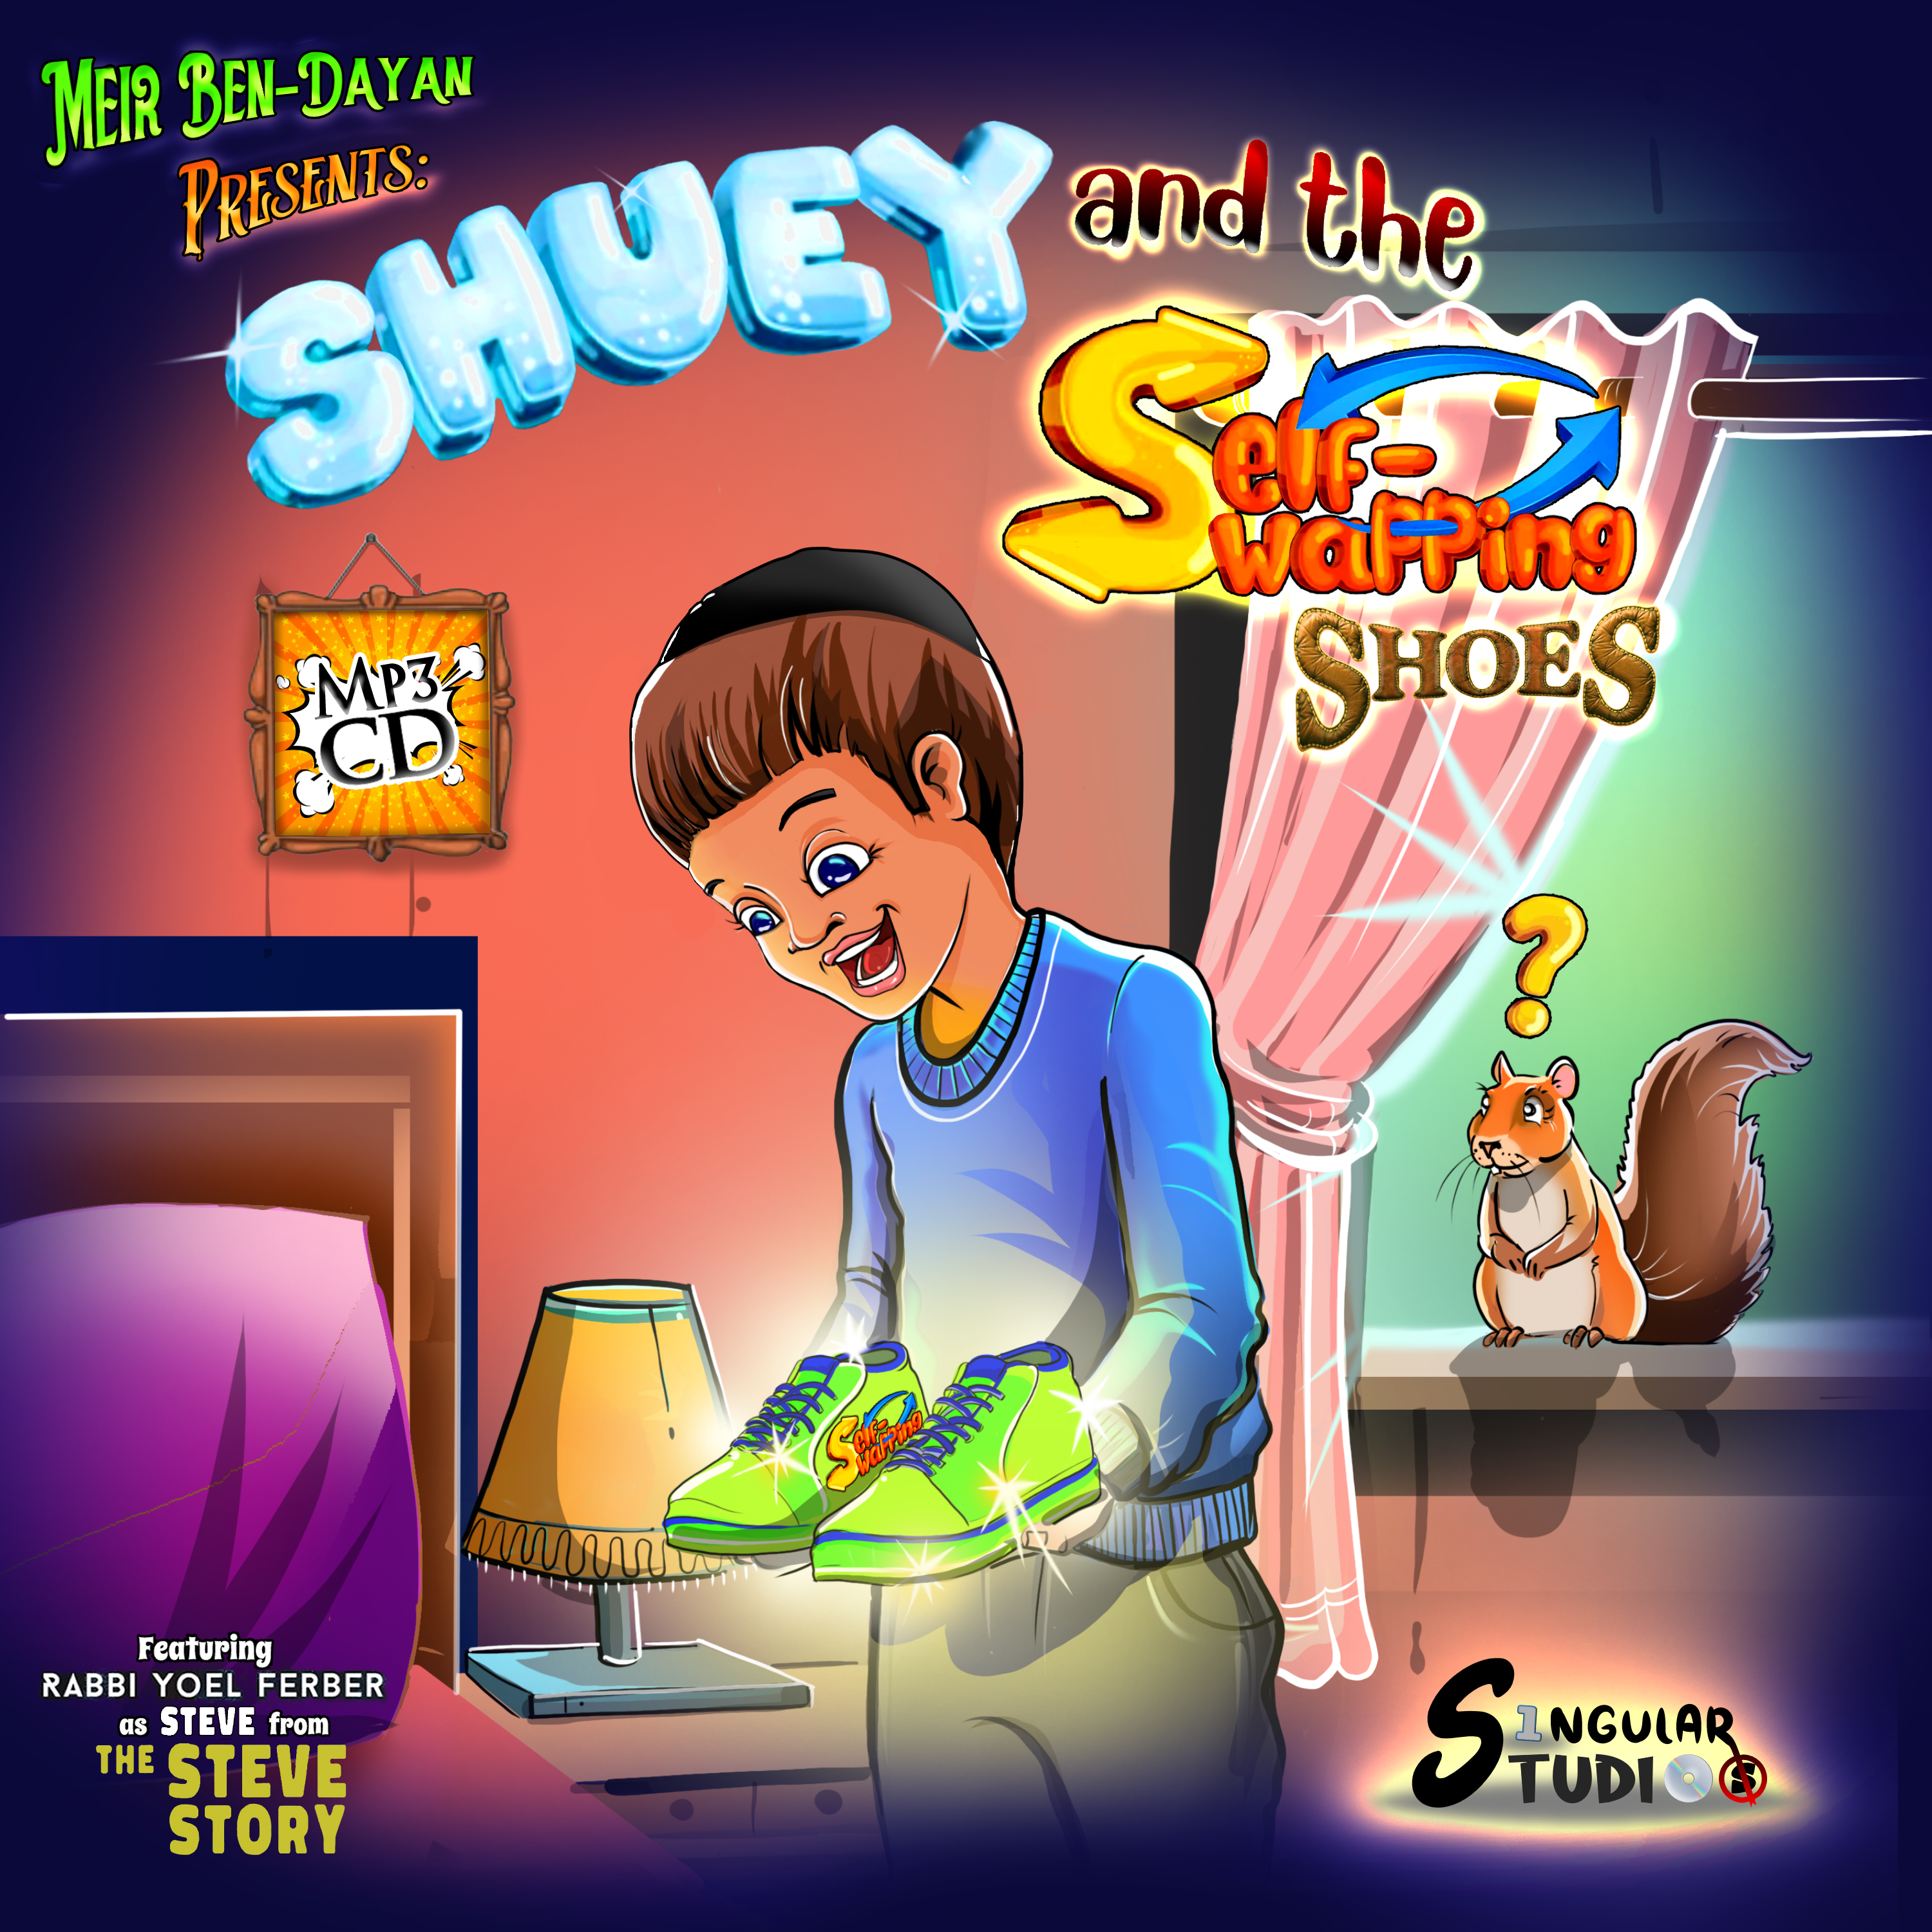 Shuey and the Self-Swapping Shoes